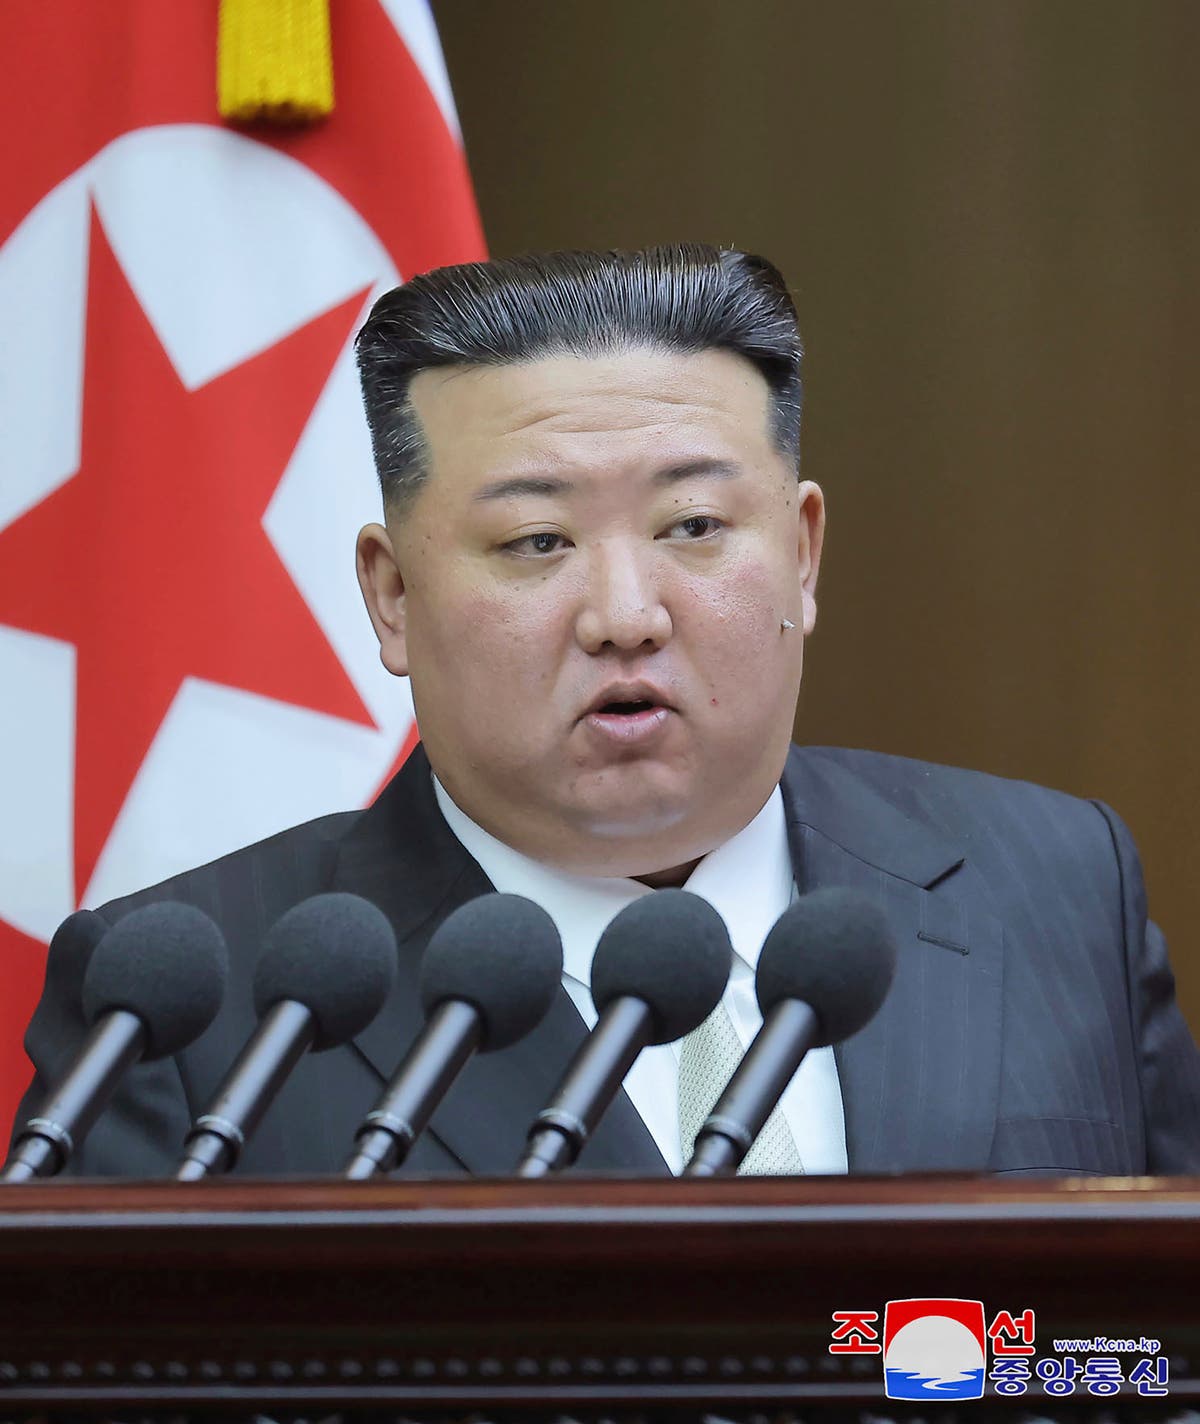 North Korean leader urges greater nuclear weapons production in response to a ‘new Cold War’